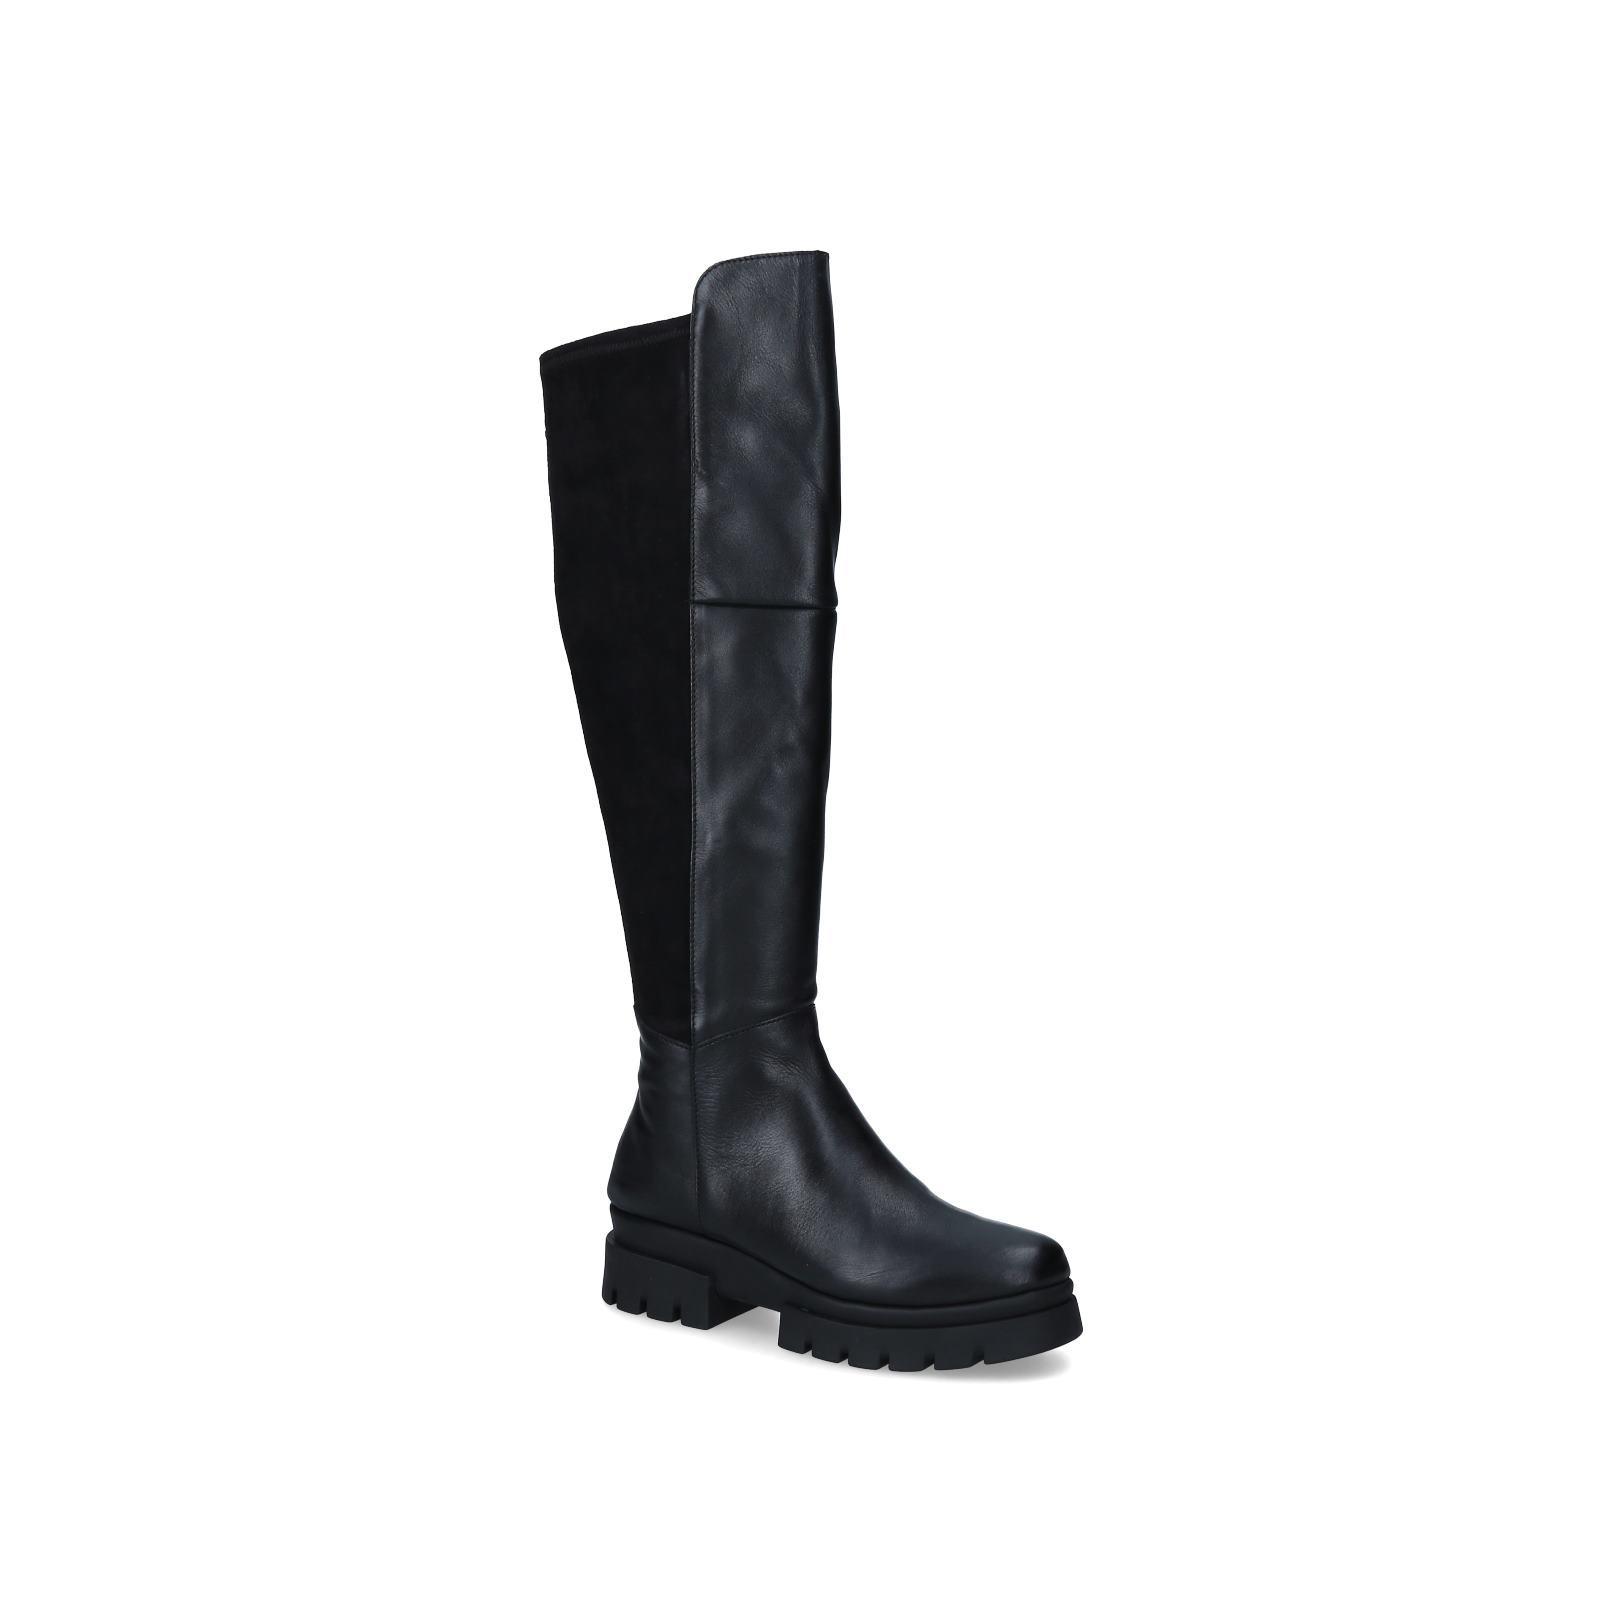 RUN 50/50 KNEE BOOT Black Leather Knee Boots by CARVELA COMFORT